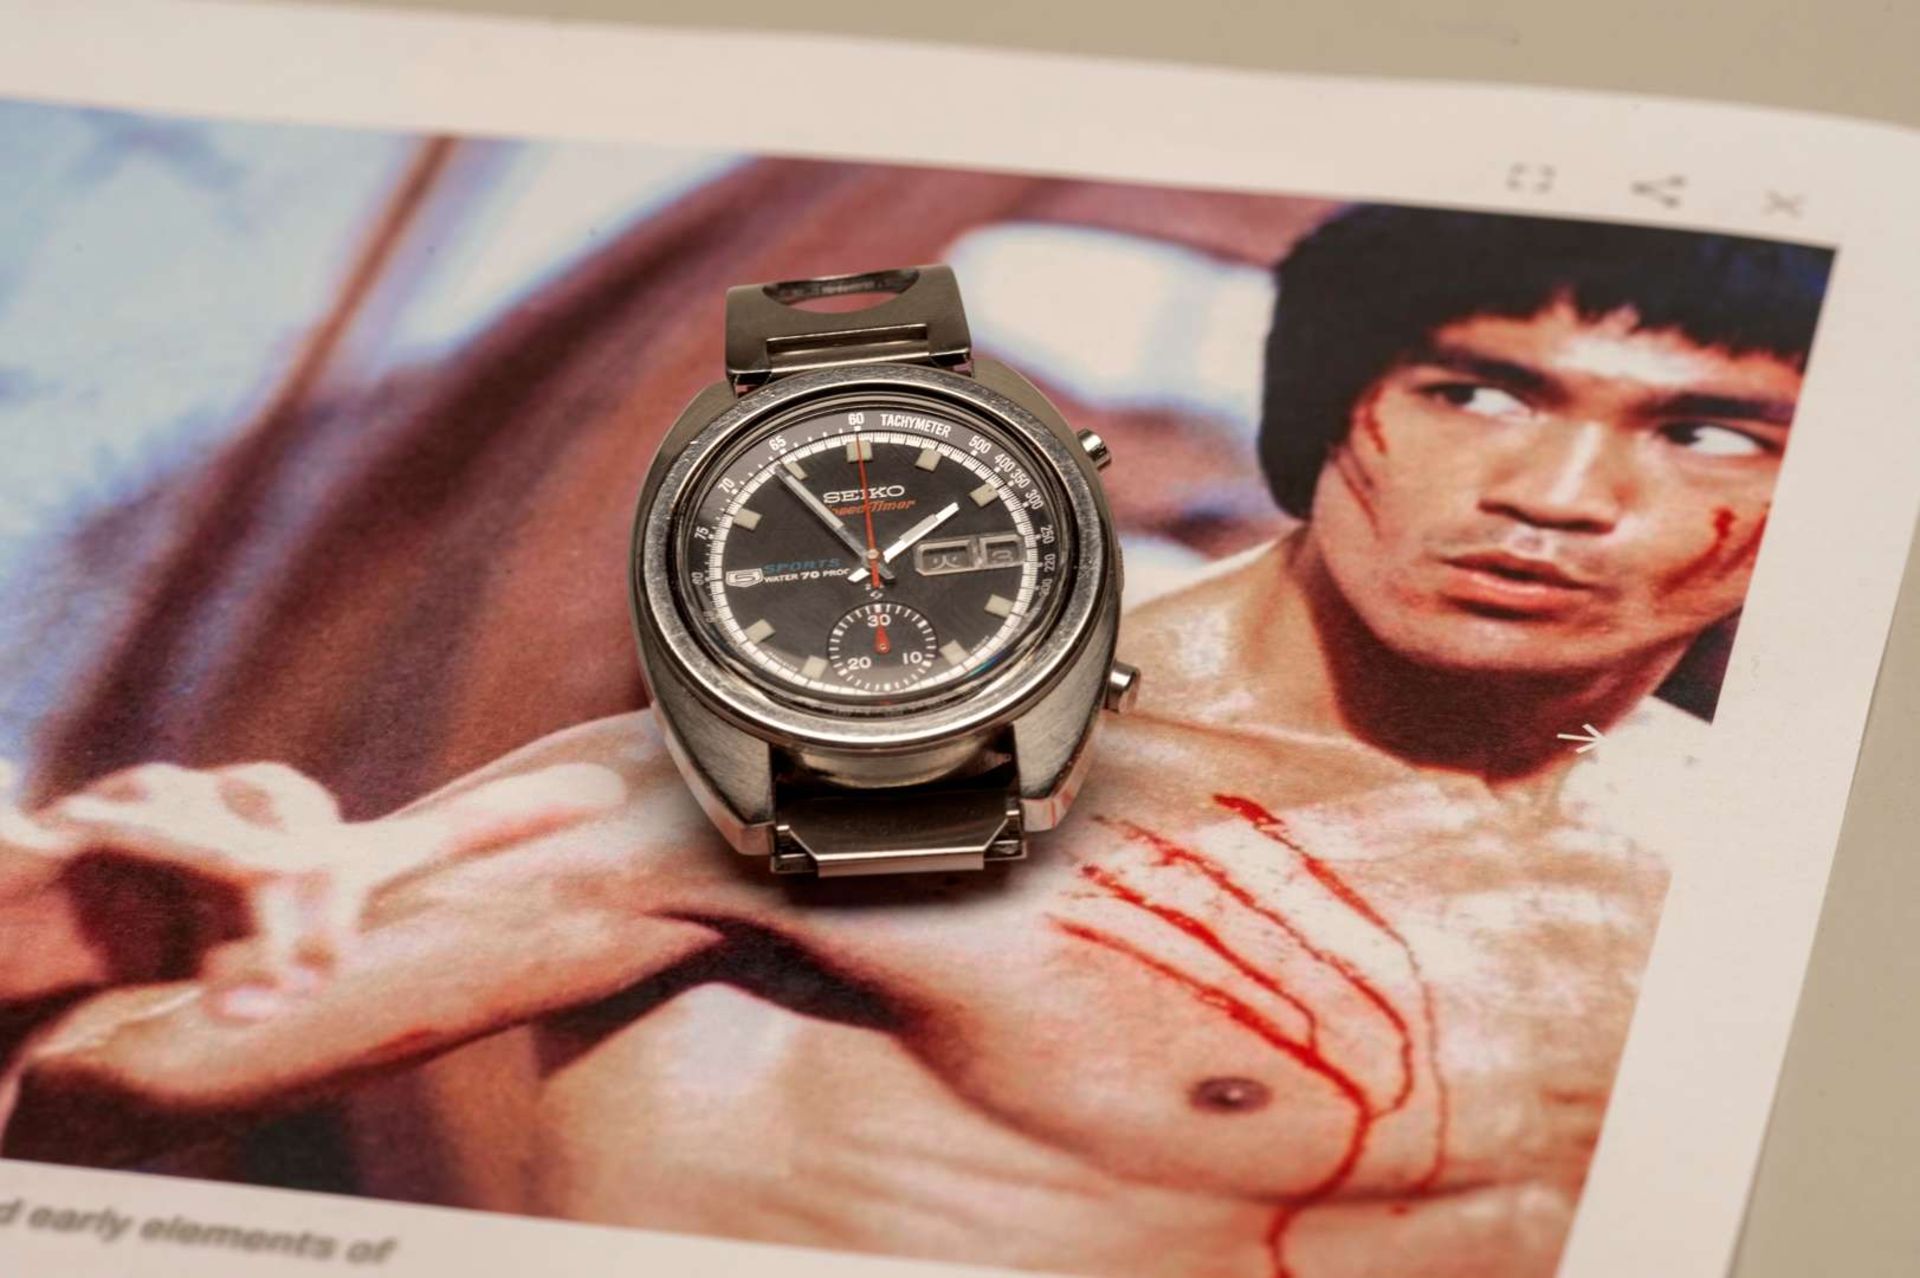 SEIKO. a 1970 Seiko SpeedTimer “Bruce Lee”, stainless steel, automatic, chronograph wristwatch. - Image 5 of 9